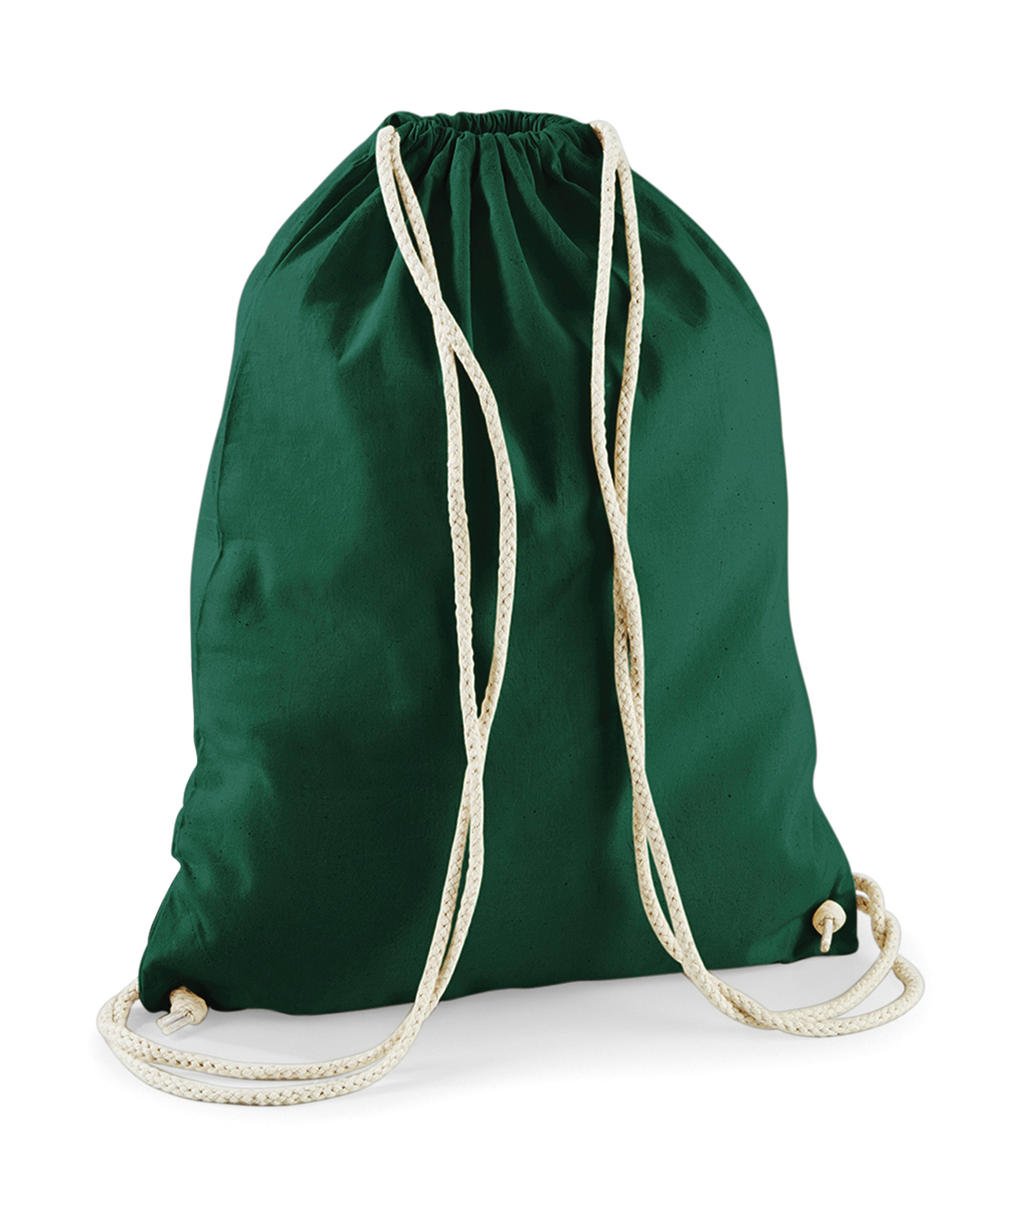  Cotton Gymsac in Farbe Bottle Green